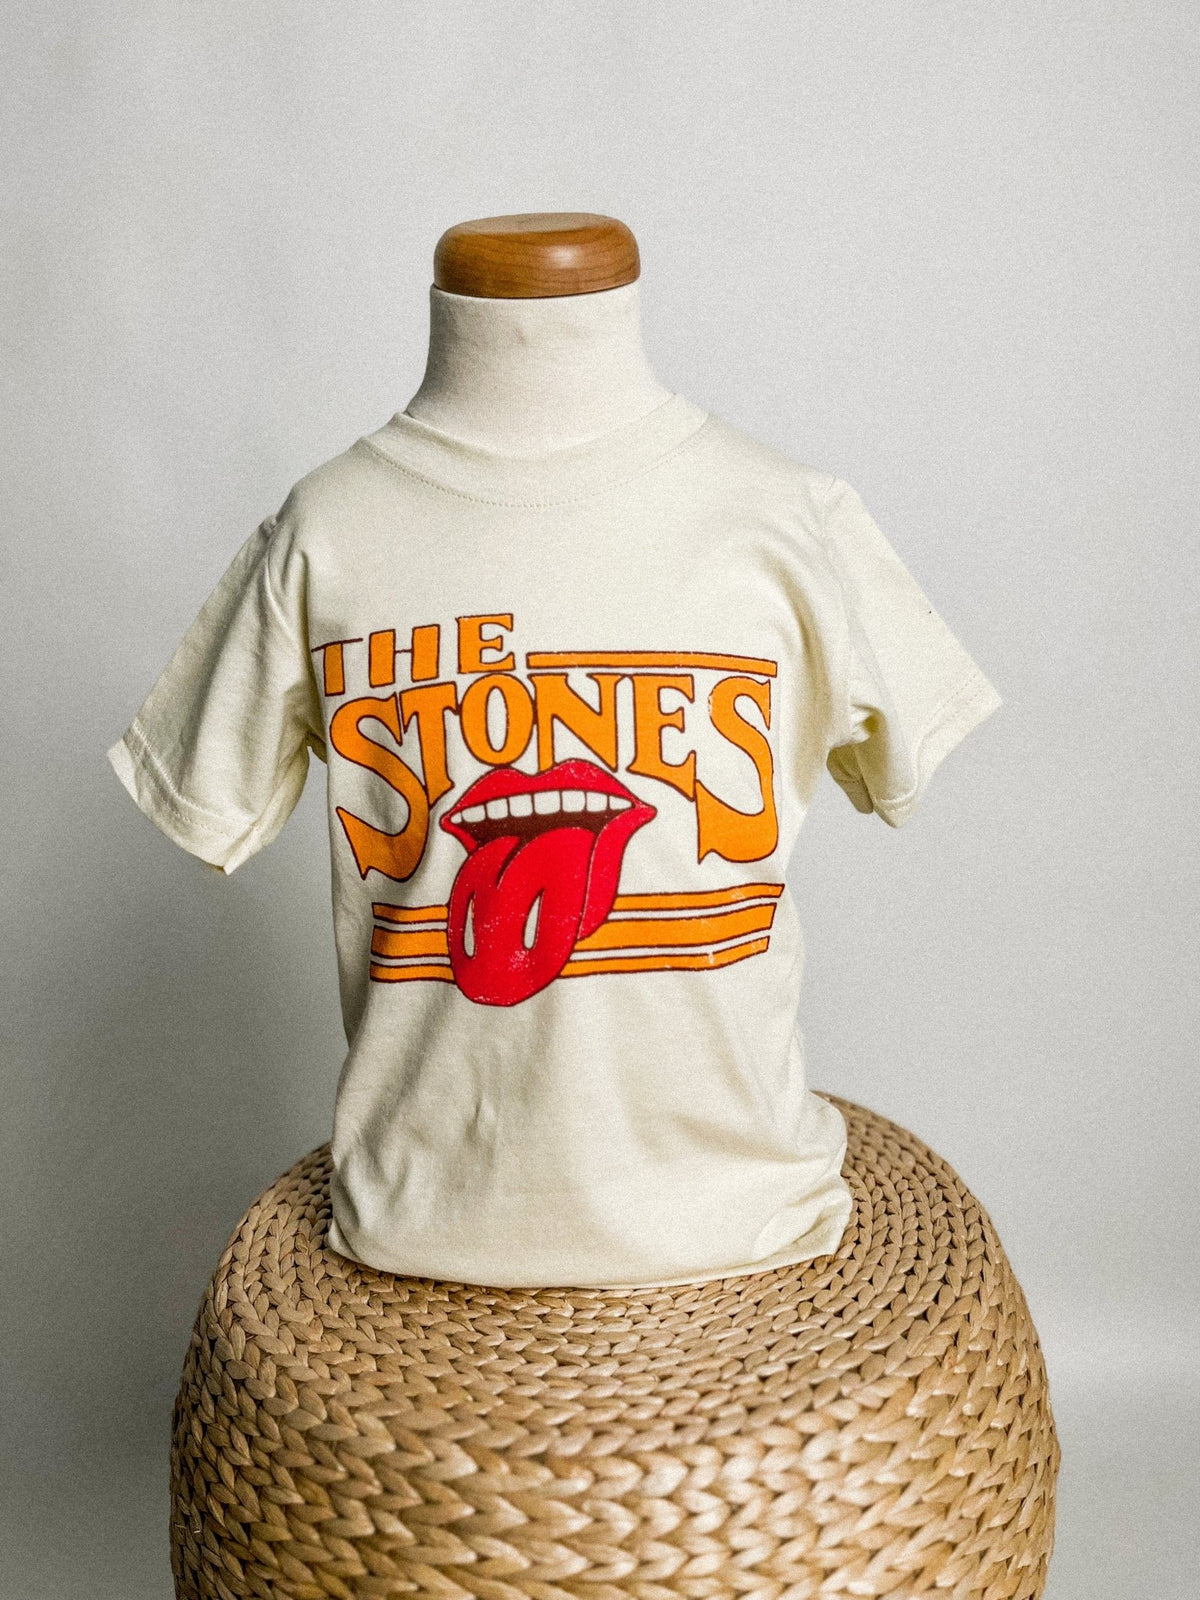 Kids Rolling Stones stoned t-shirt off white - Trendy Band T-Shirts and Sweatshirts at Lush Fashion Lounge Boutique in Oklahoma City